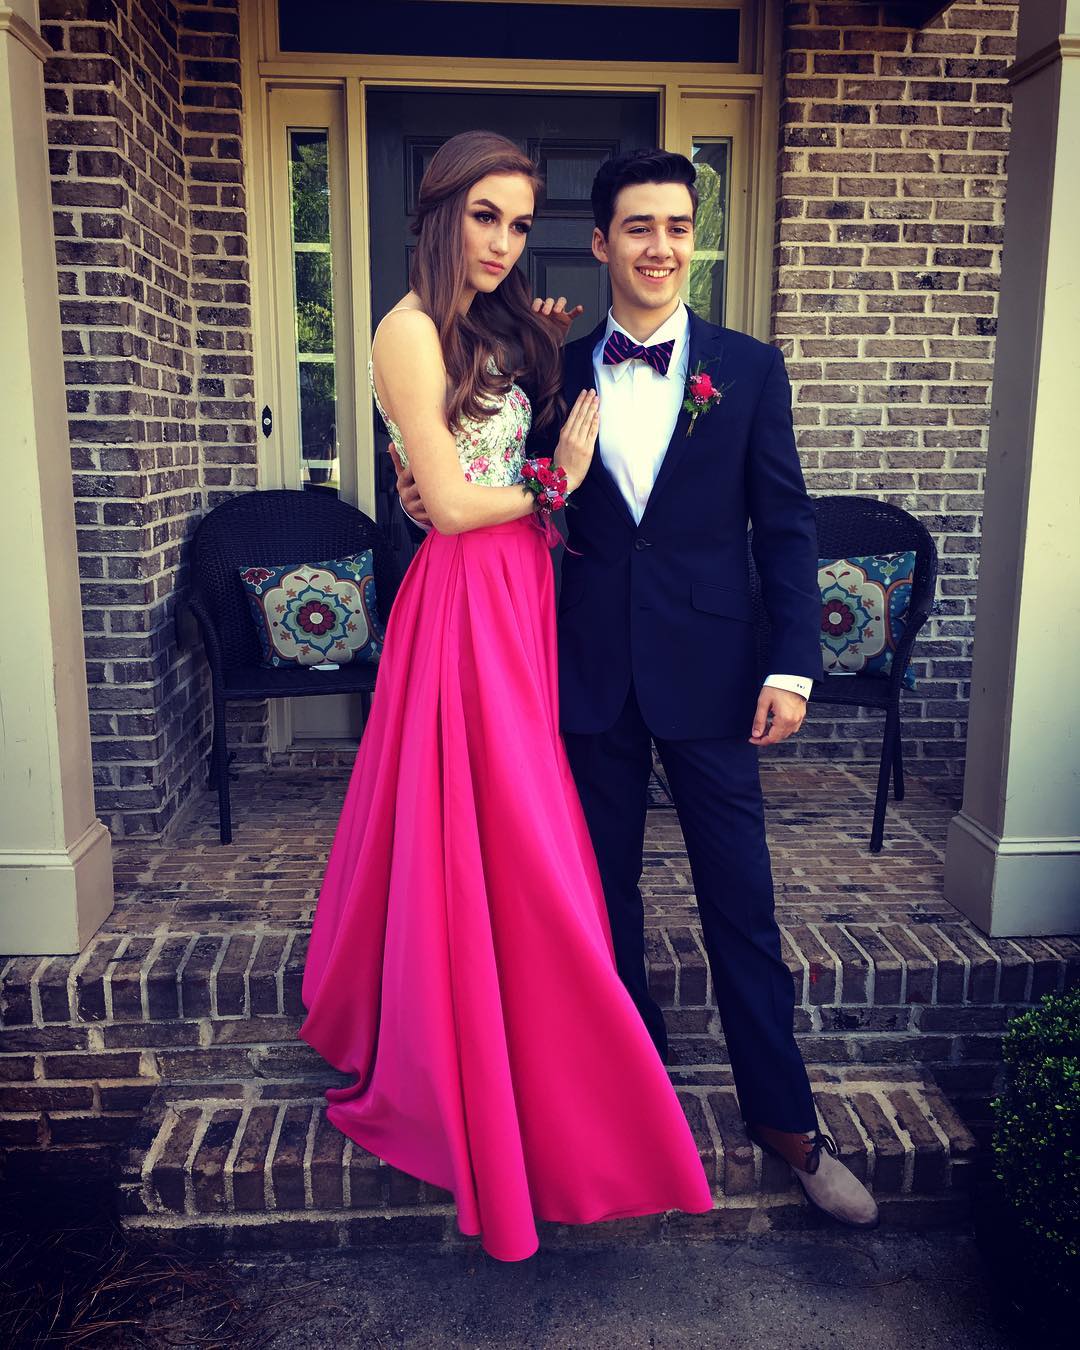 Picture of Madison on Instagram Captioned: "Prom with Bae". know more about her marriage, wedding, engagement, boyfriend, relationship status and many more